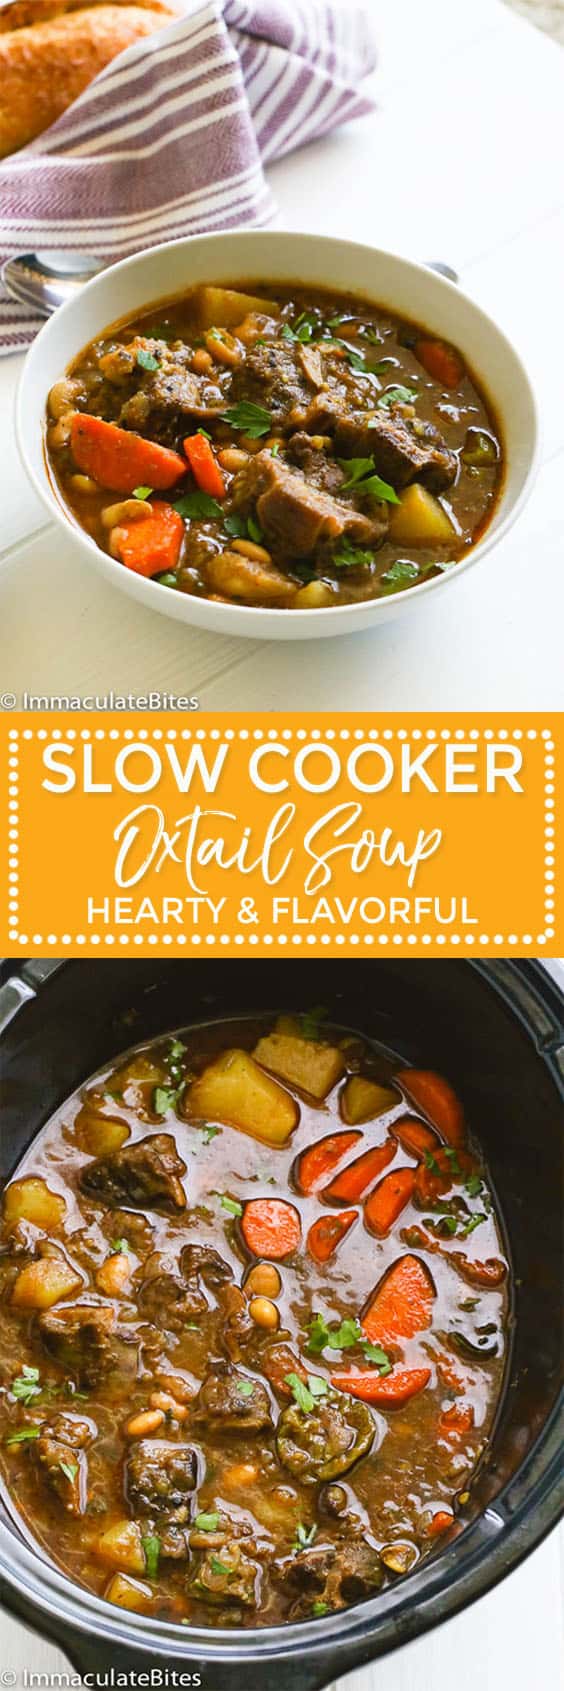 slow cooker oxtail soup